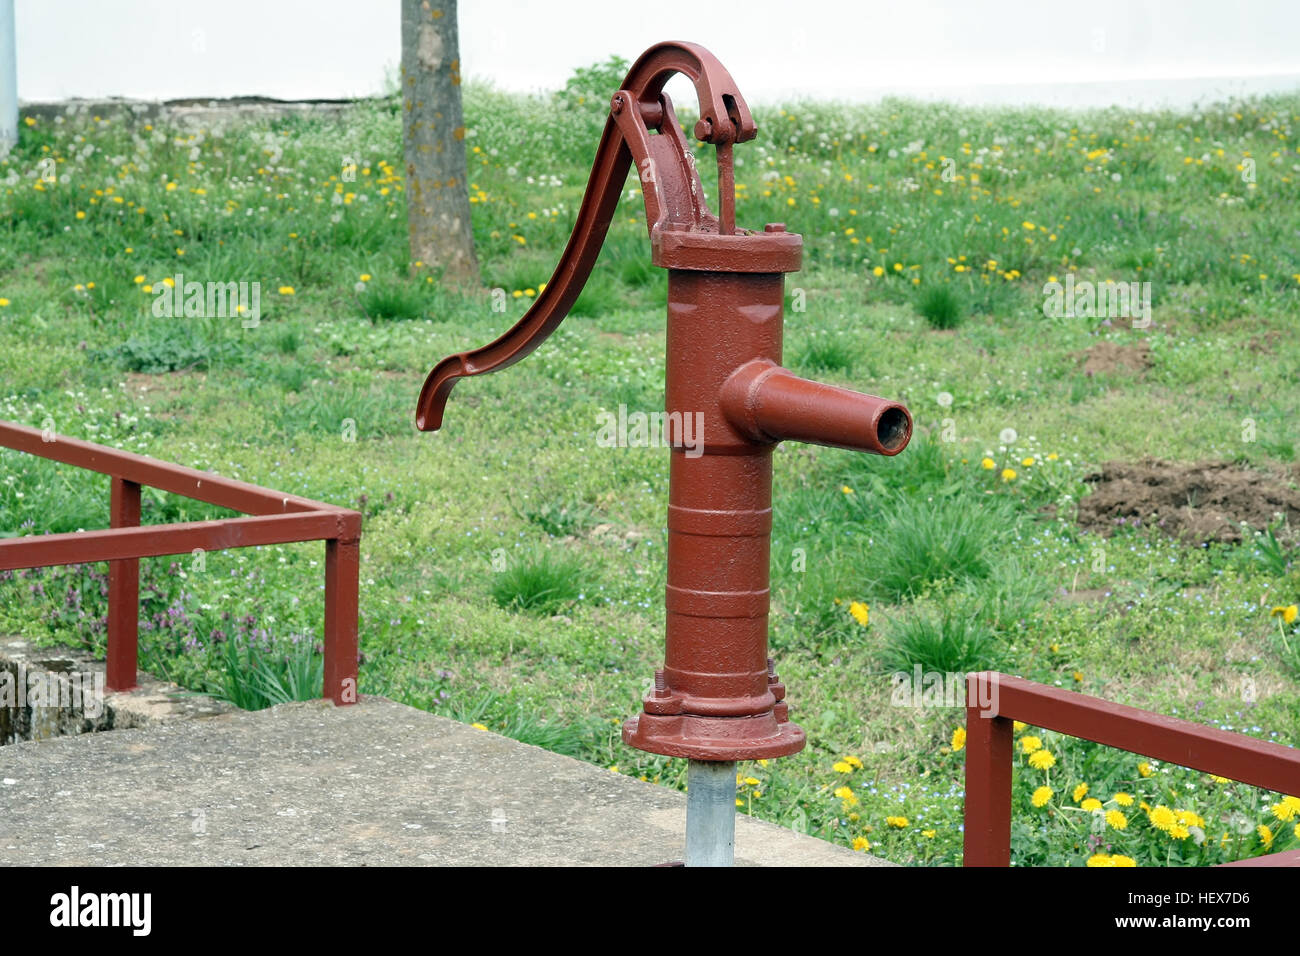 Vintage Water Faucet Old Water Pump Stock Photo 129654370 Alamy